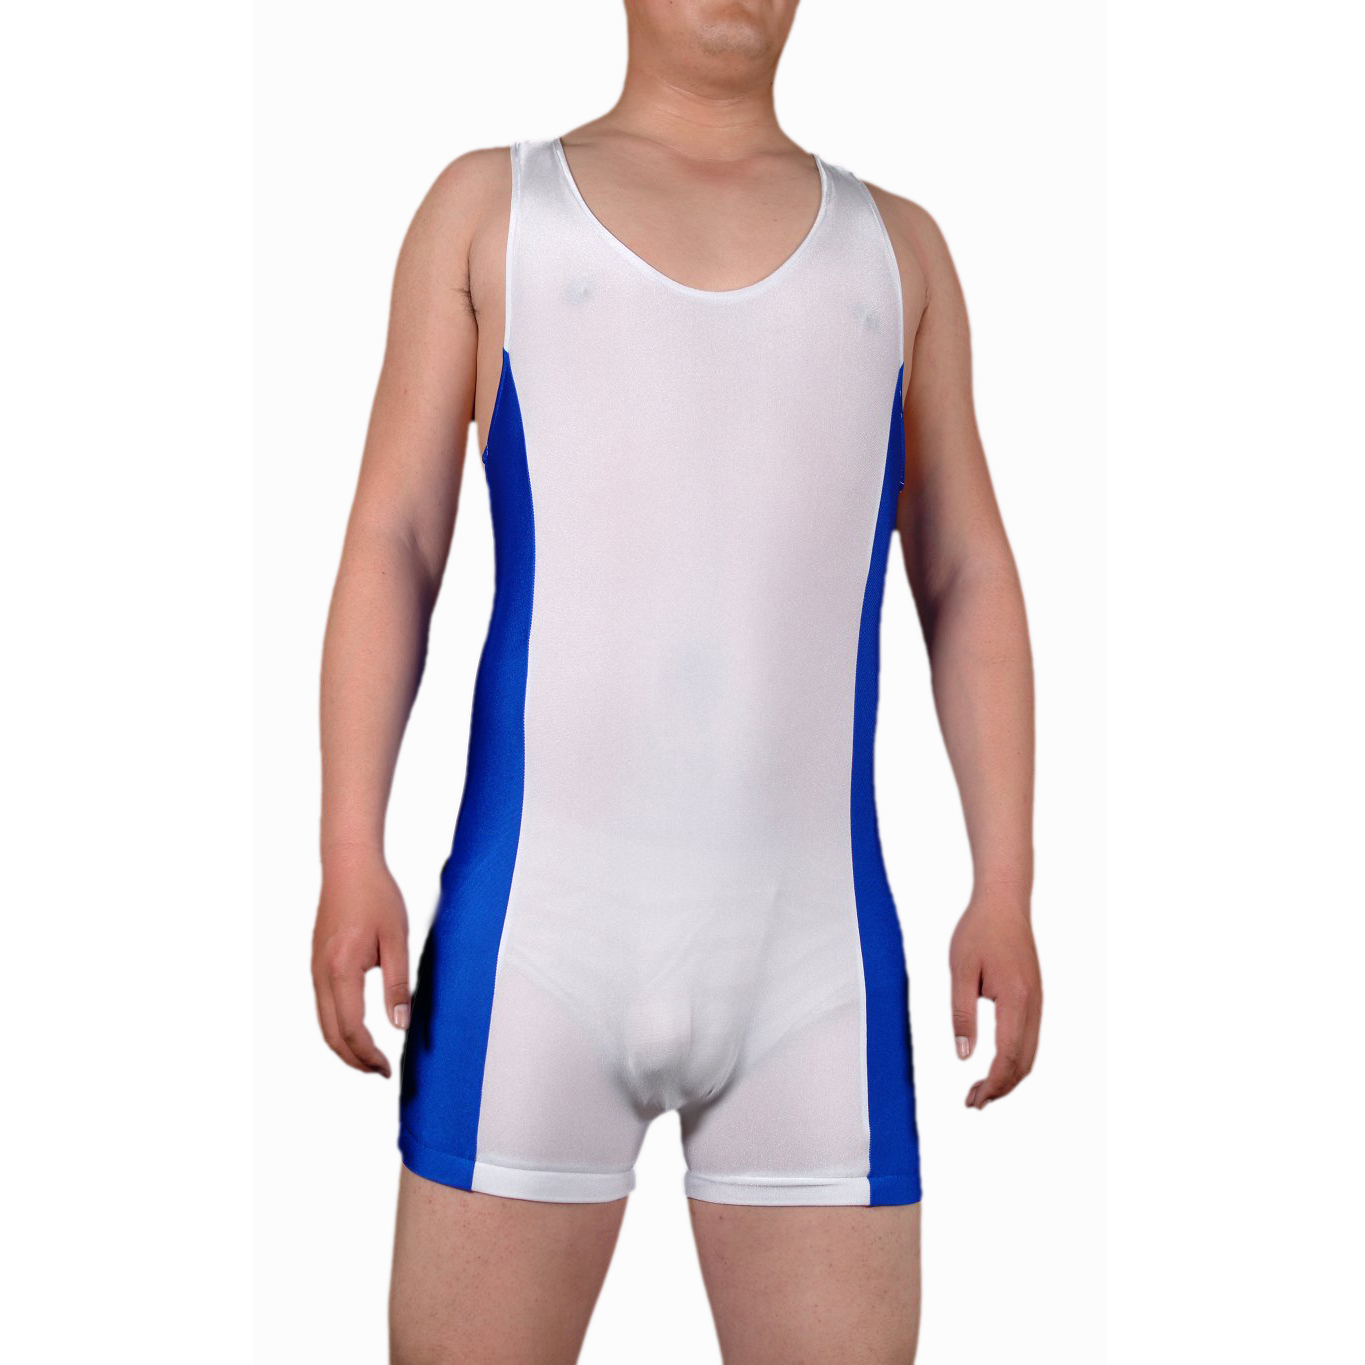 Men's Jumpsuit-styled White with Blue Strips Lycra Spandex Sleev - Click Image to Close